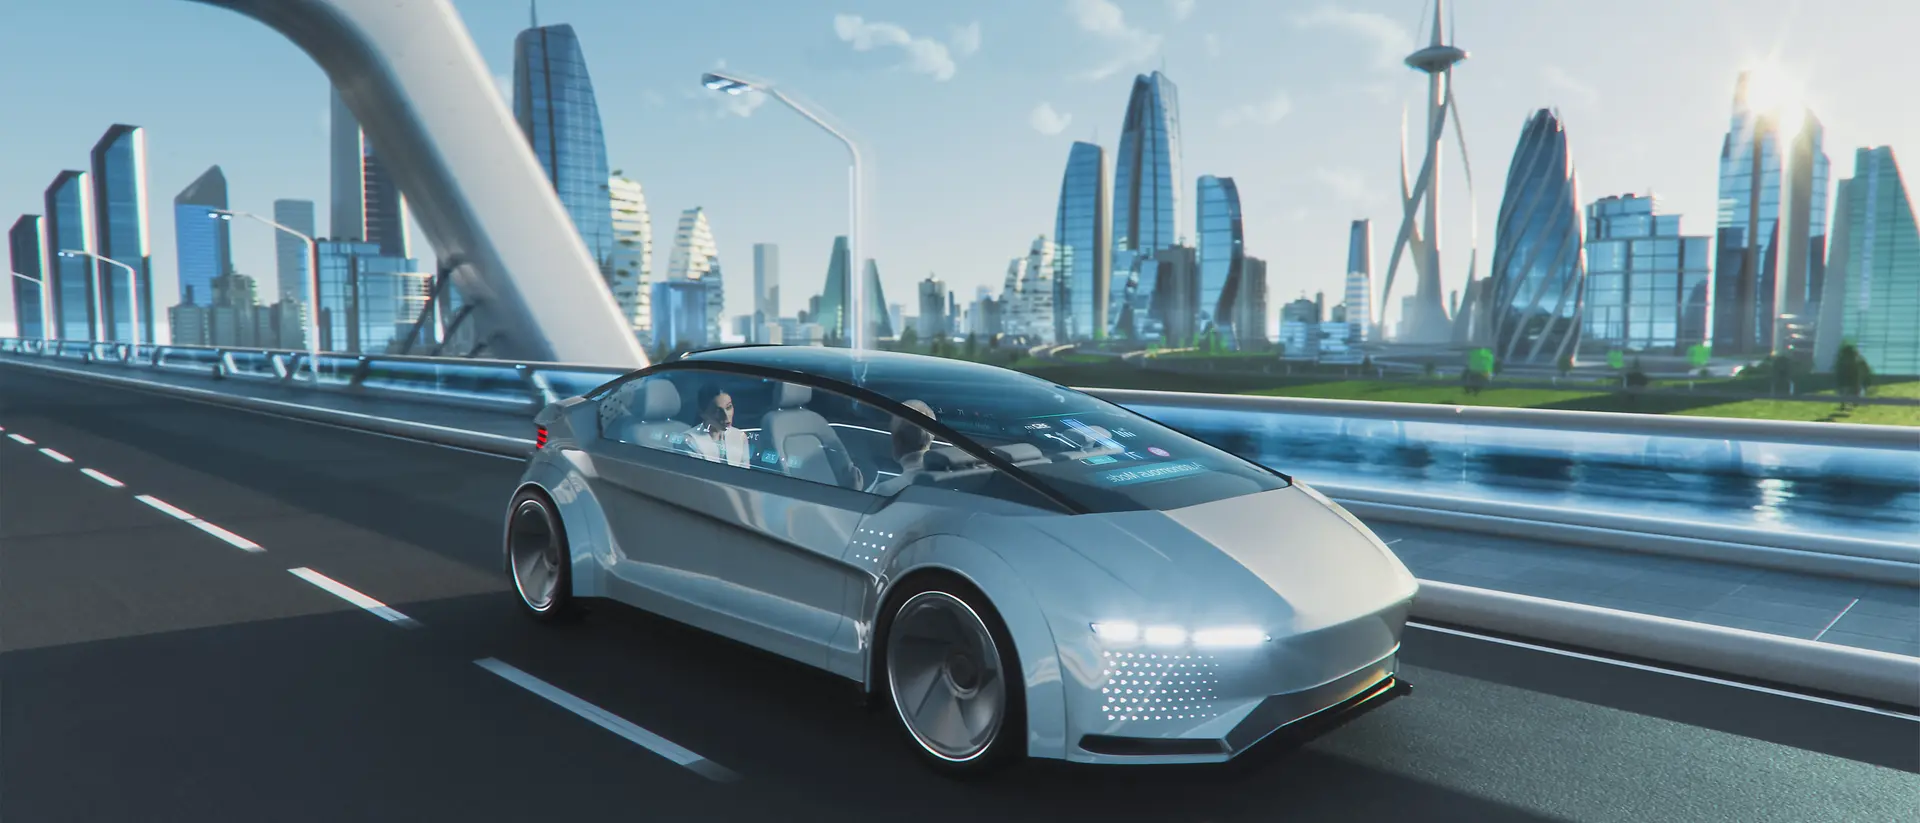 Computer-generated image of a futuristic metallic gray car with a glass top. It´s being driven on a road with futuristic glass skyscrapers in the background.